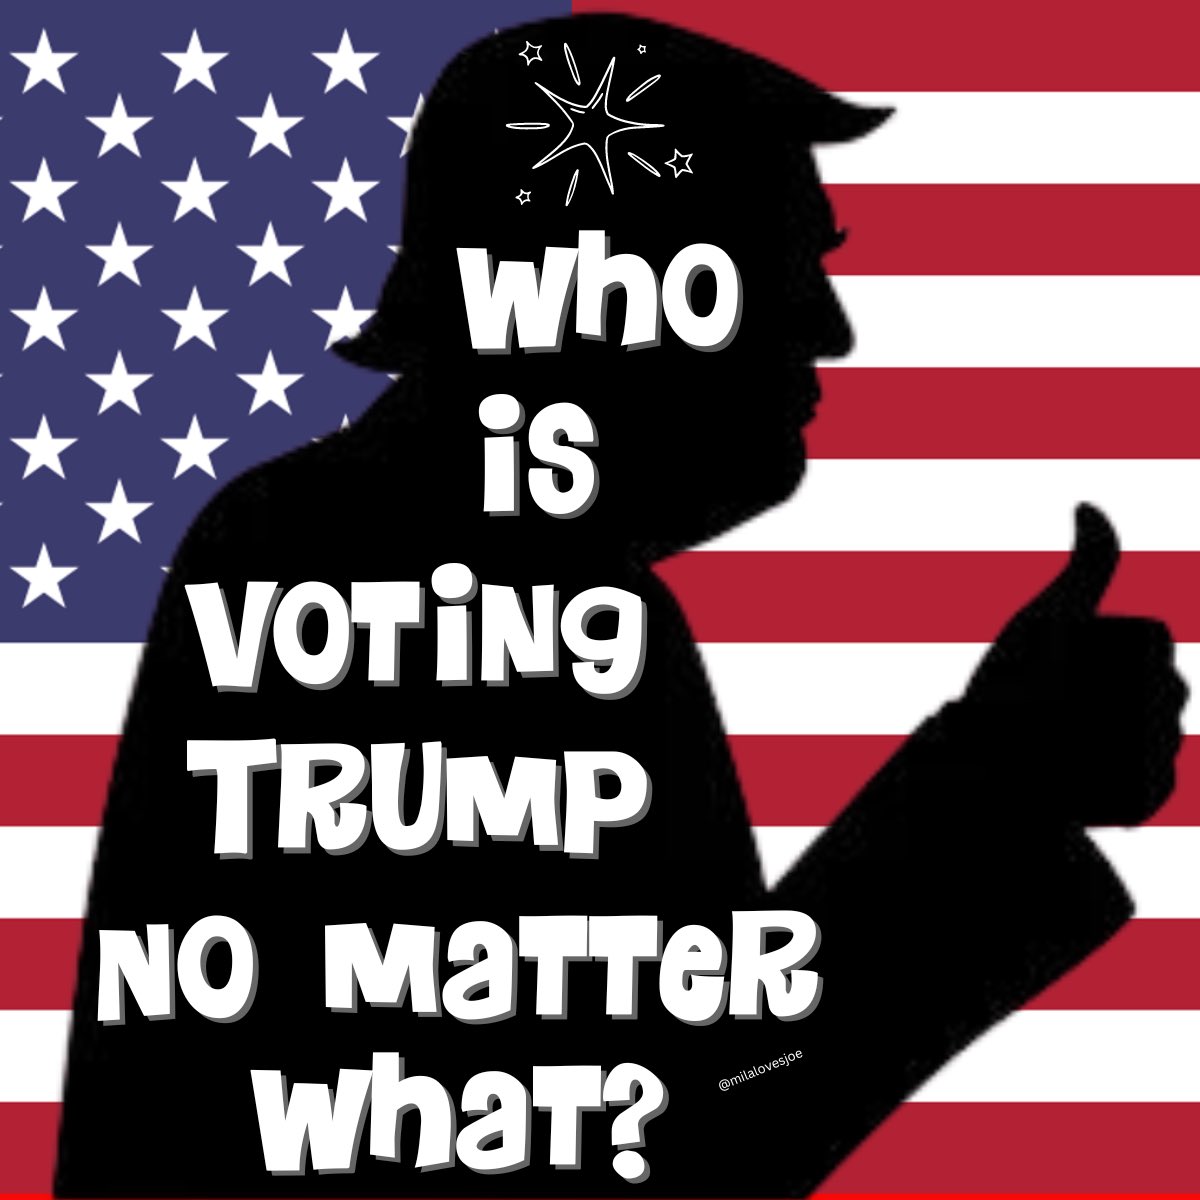 Who's voting Trump this November no matter what?